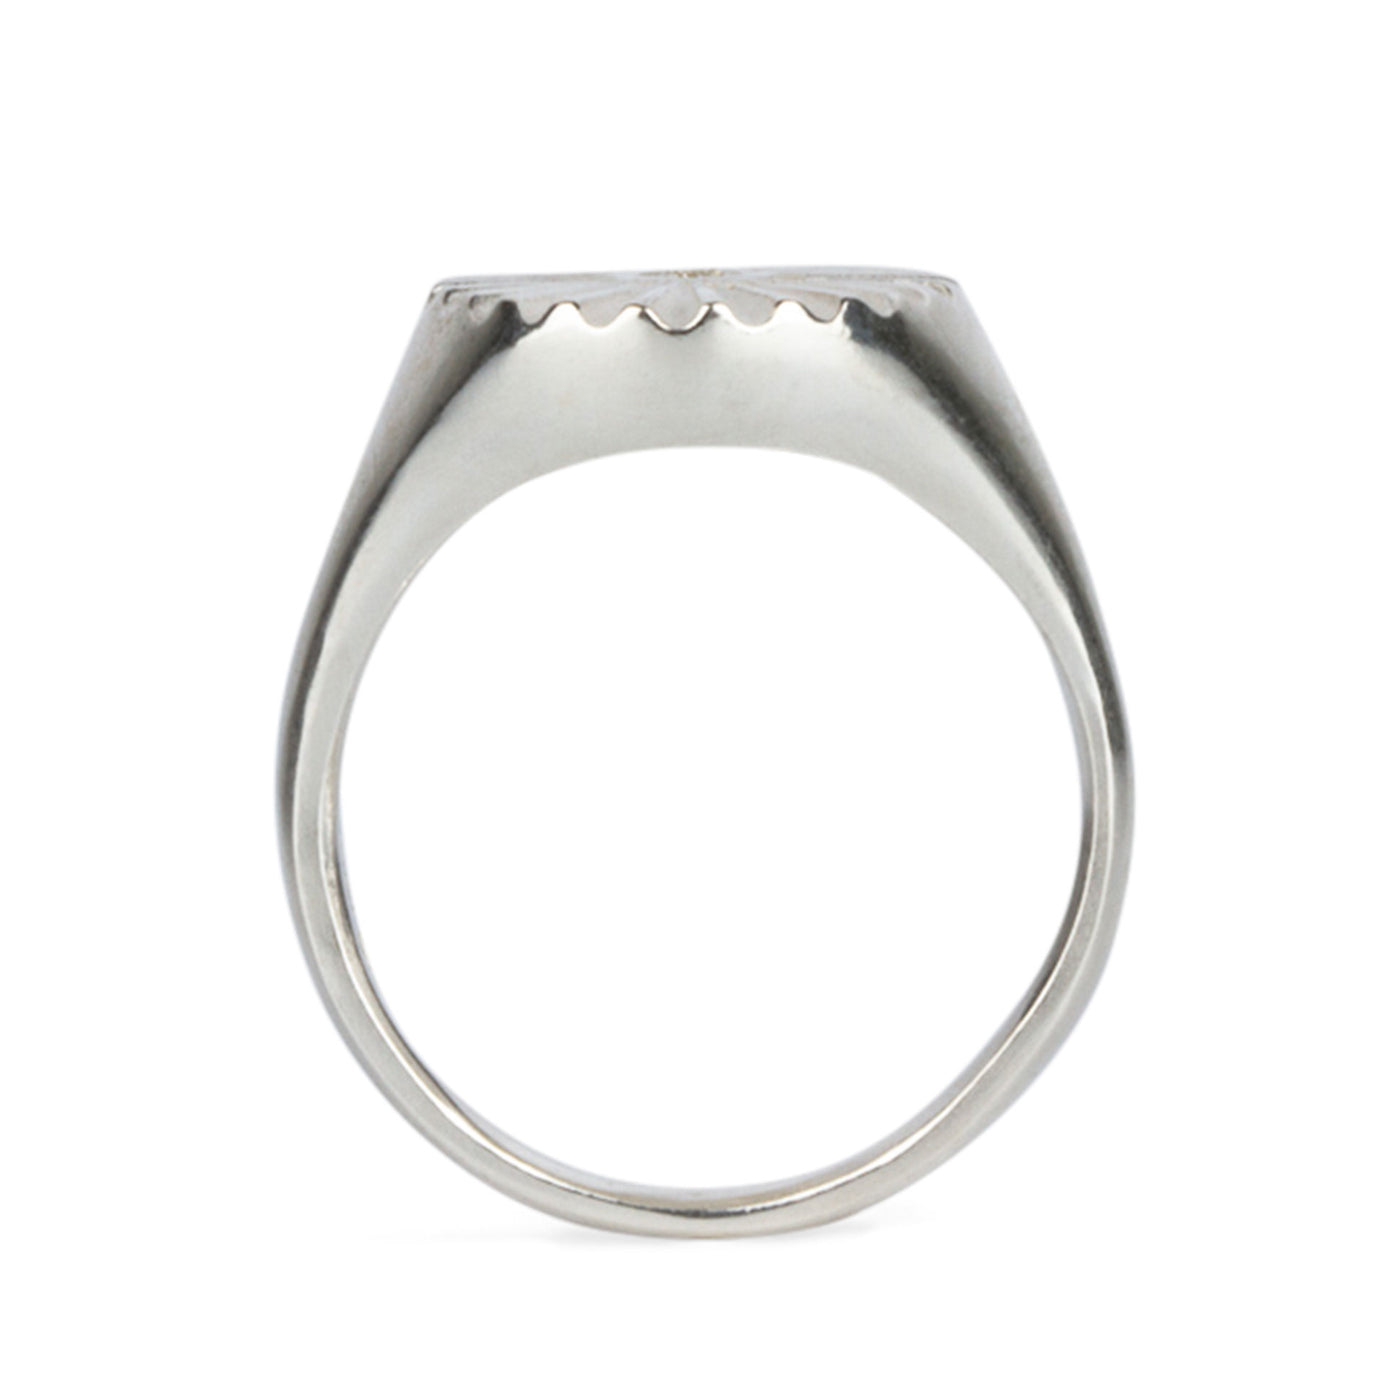 Profile view of Large silver oval signet ring with a carved sunburst pattern and diamond center on a white background